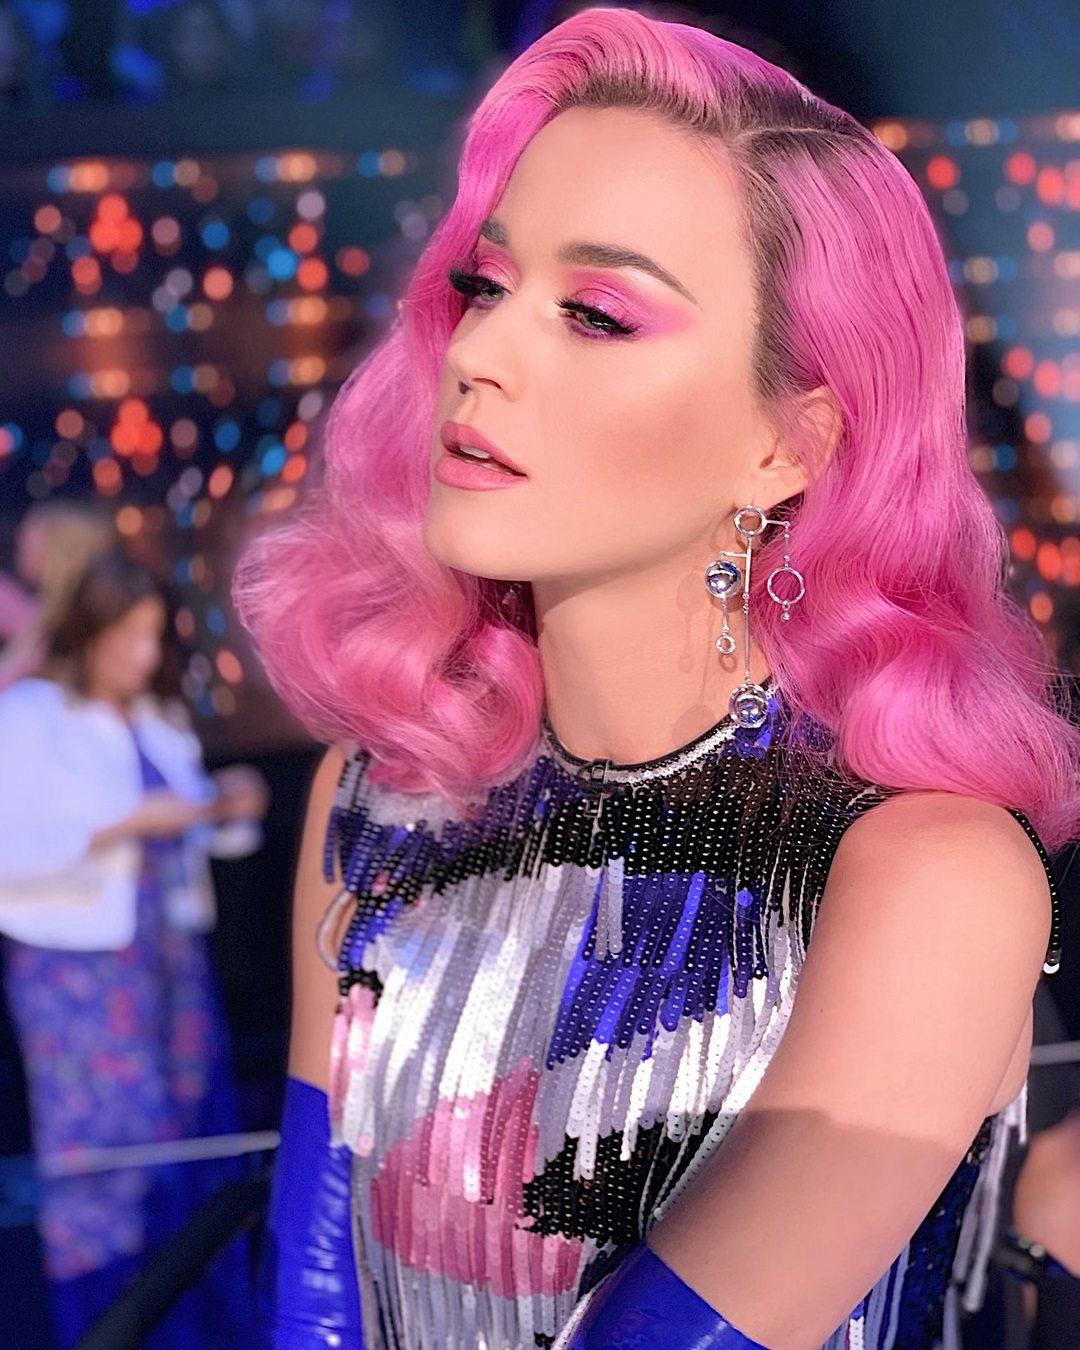 Katy Perry Hairstyle 19 Katy Perry 2023 | Katy Perry blonde hair | Katy Perry bob haircut Katy Perry Hairstyles